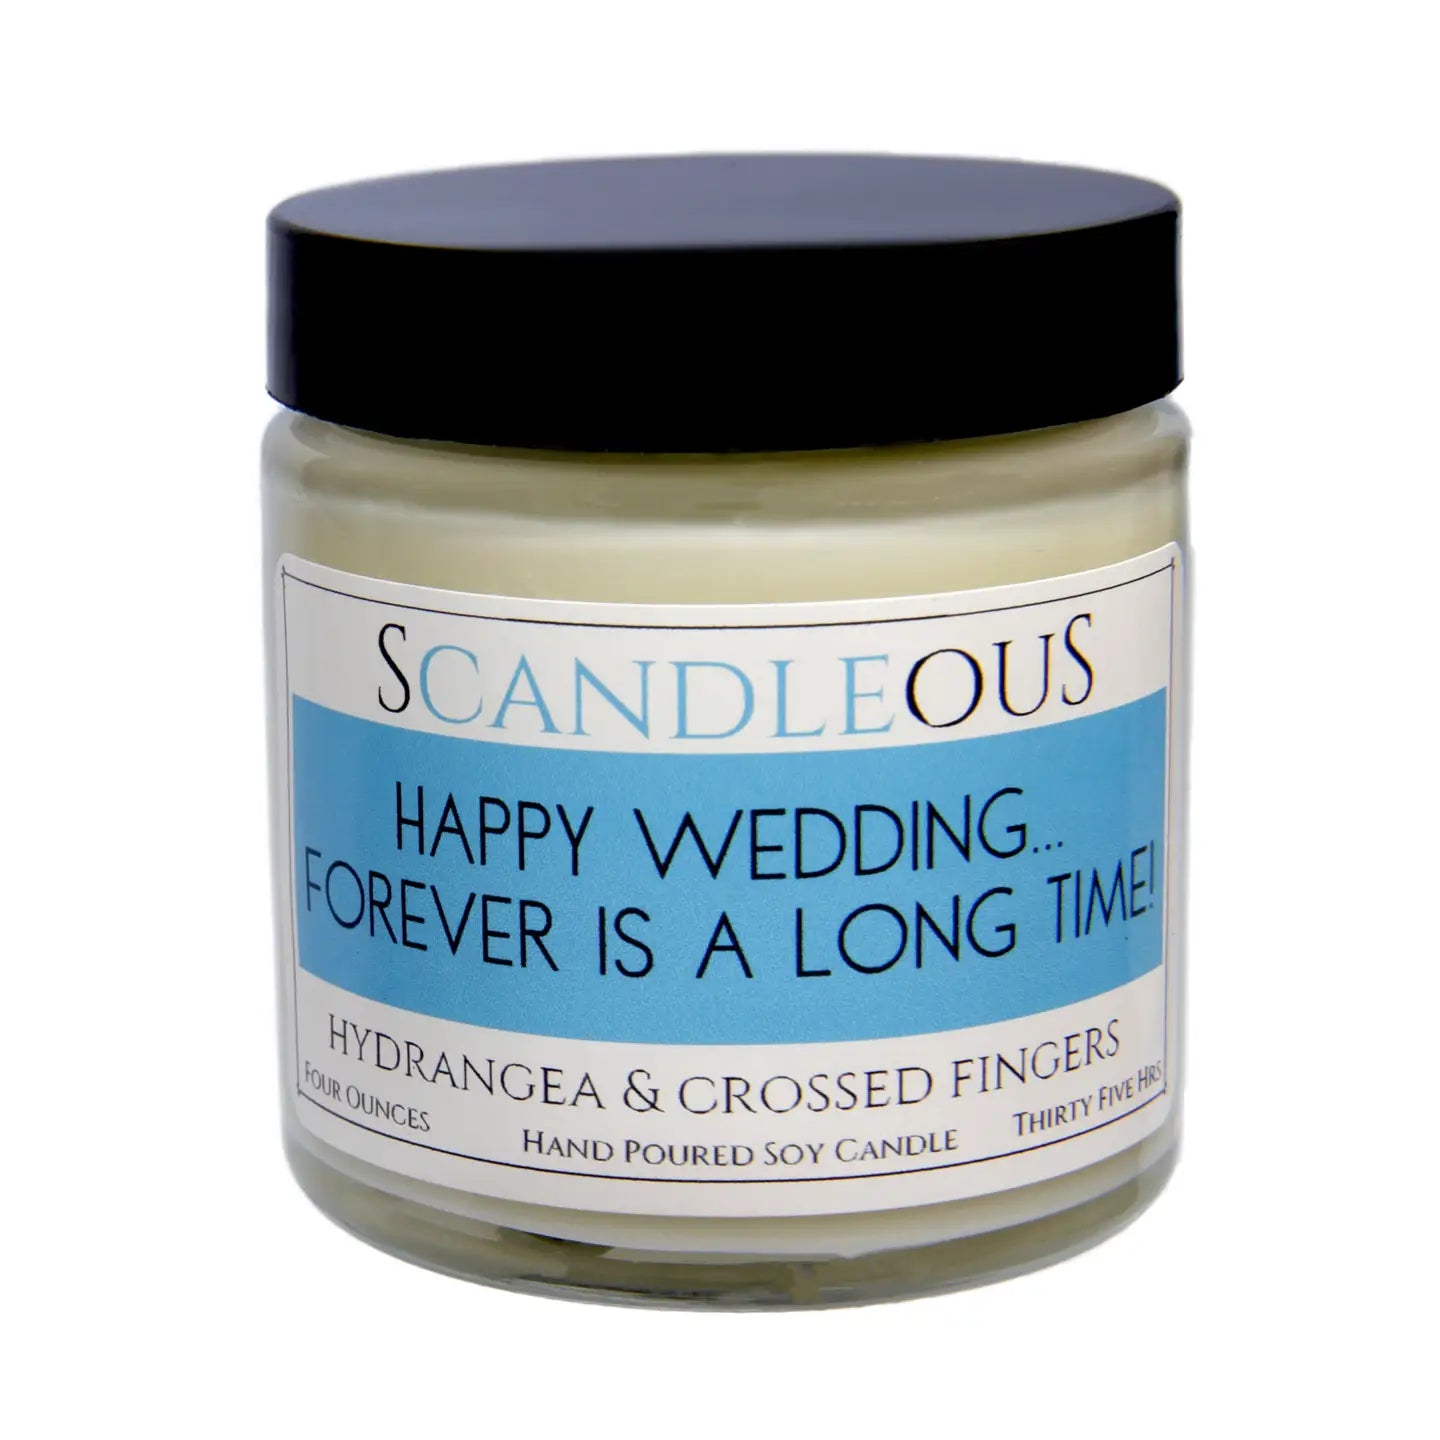 sCANDLEous All-Natural Scented Soy Candles